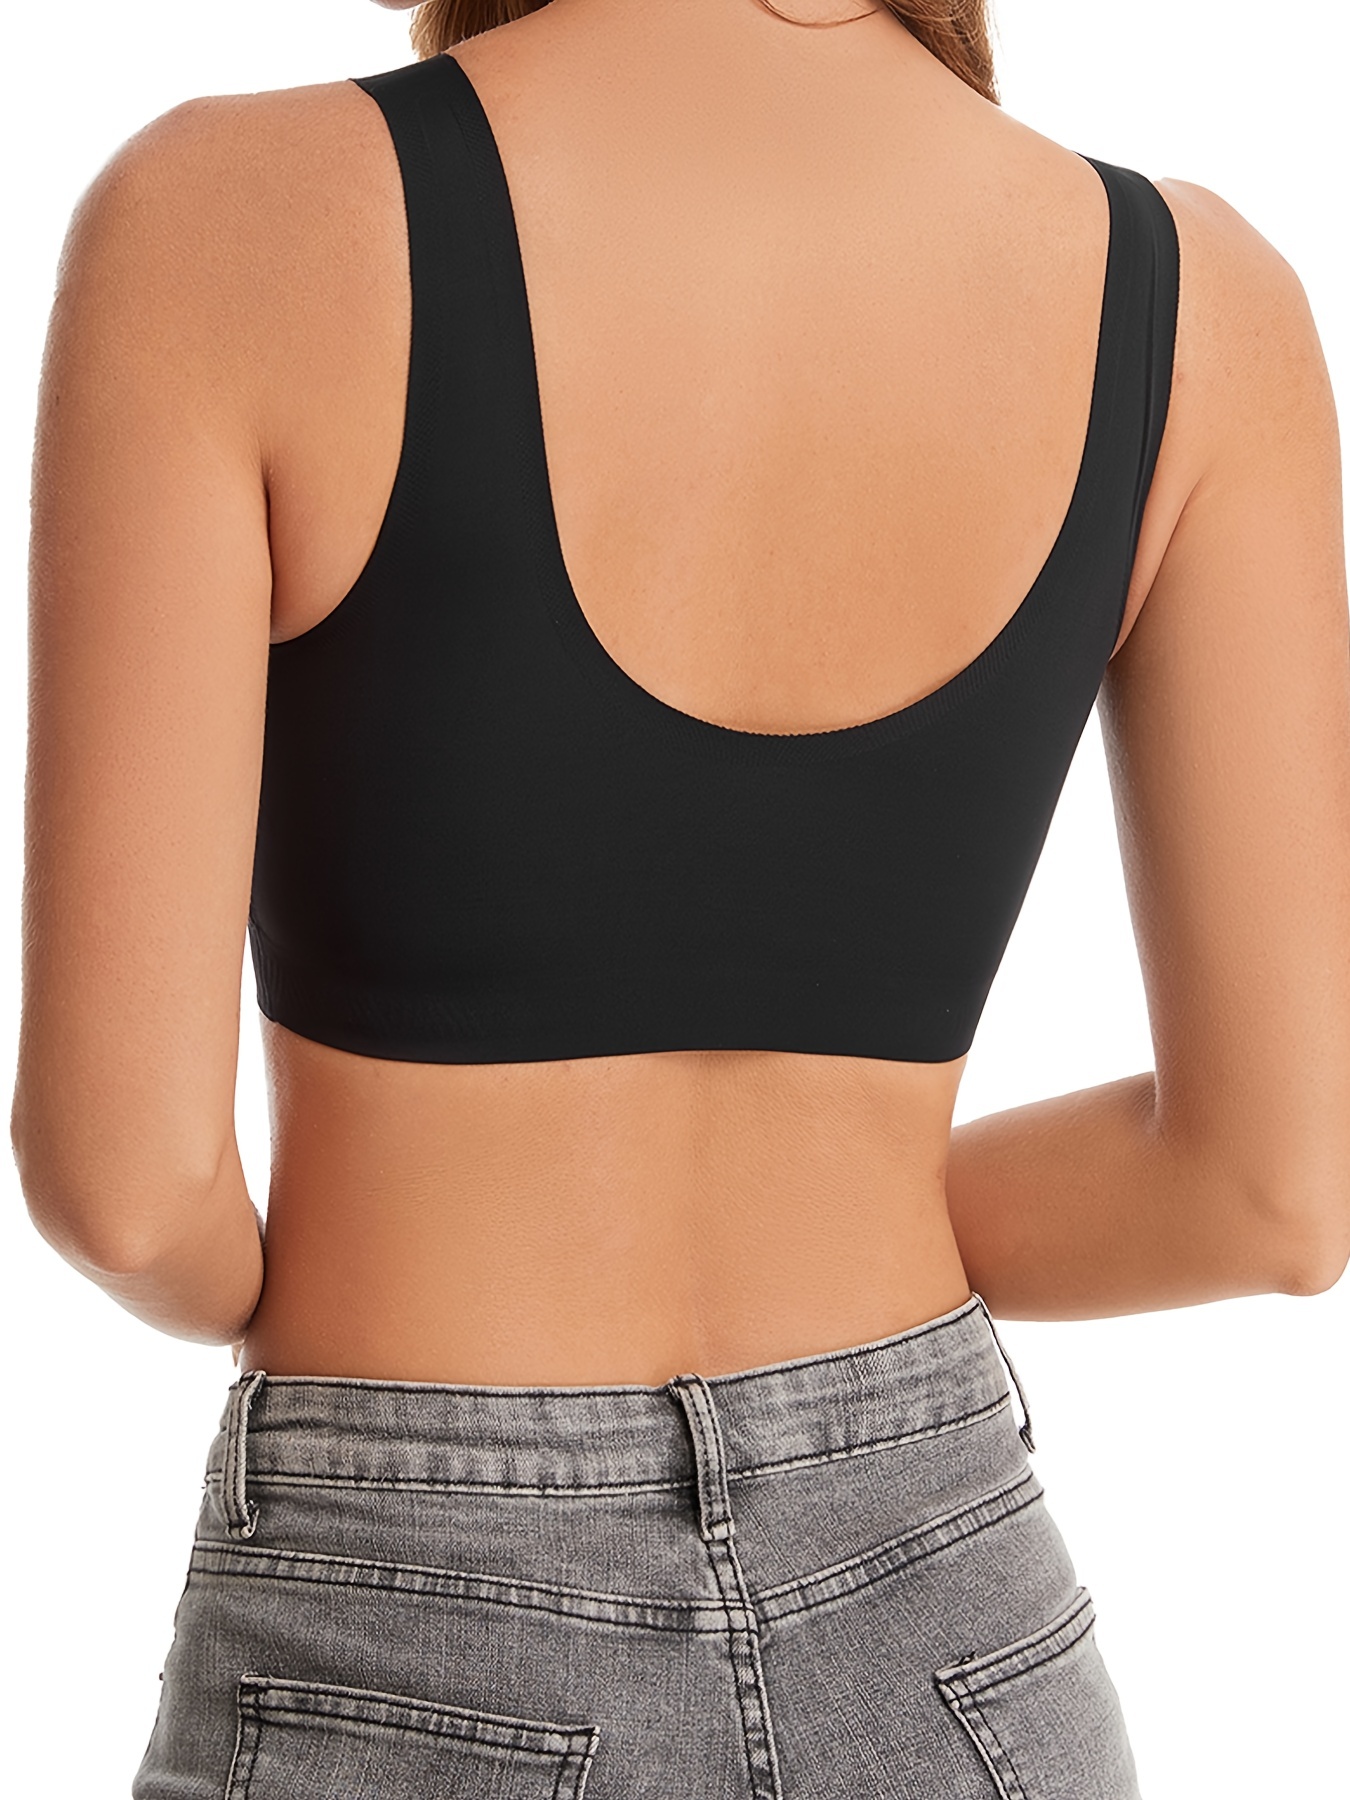 Aayomet Push Up Bras for Women Women's Full Figure No Bounce Plus Size  Camisole Wirefree Back Close Sports Bra,Coffee 50/115C 